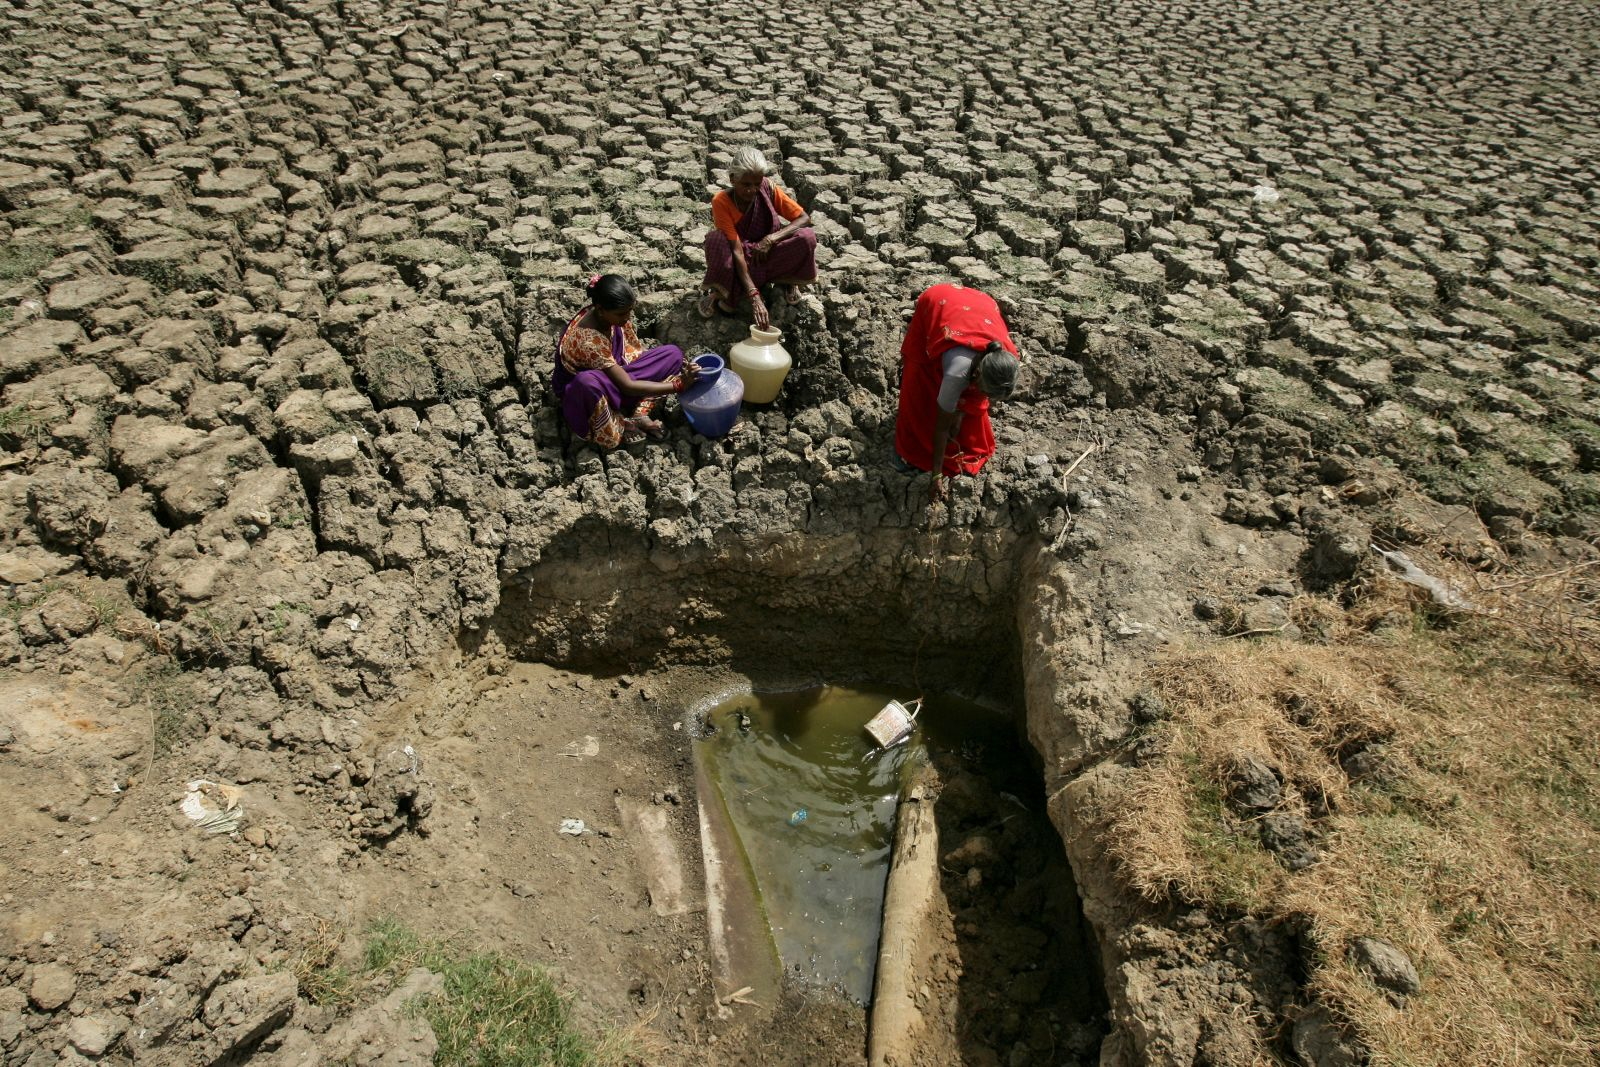 Women fetch water from an opening made at a dried-up lake in Chennai, India, on 11 June 2019. Photo: P. Ravikumar / Reuters